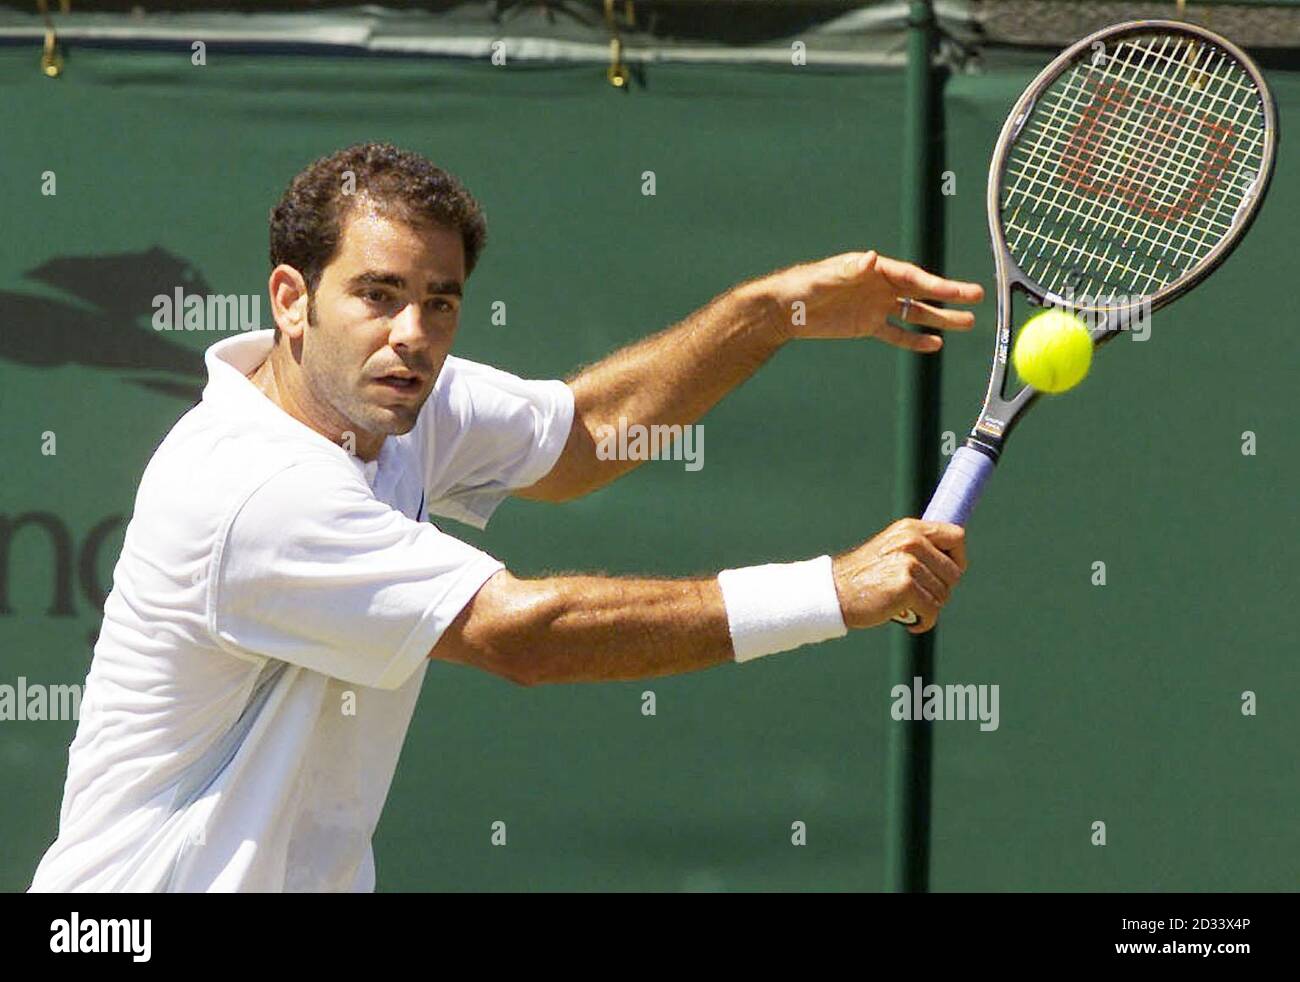 Seven times Wimbledon Champion Pete Sampras in action against the un-seeded Swiss tennis player George Bastl on Court Two at The All England Lawn Tennis Club. Stock Photo